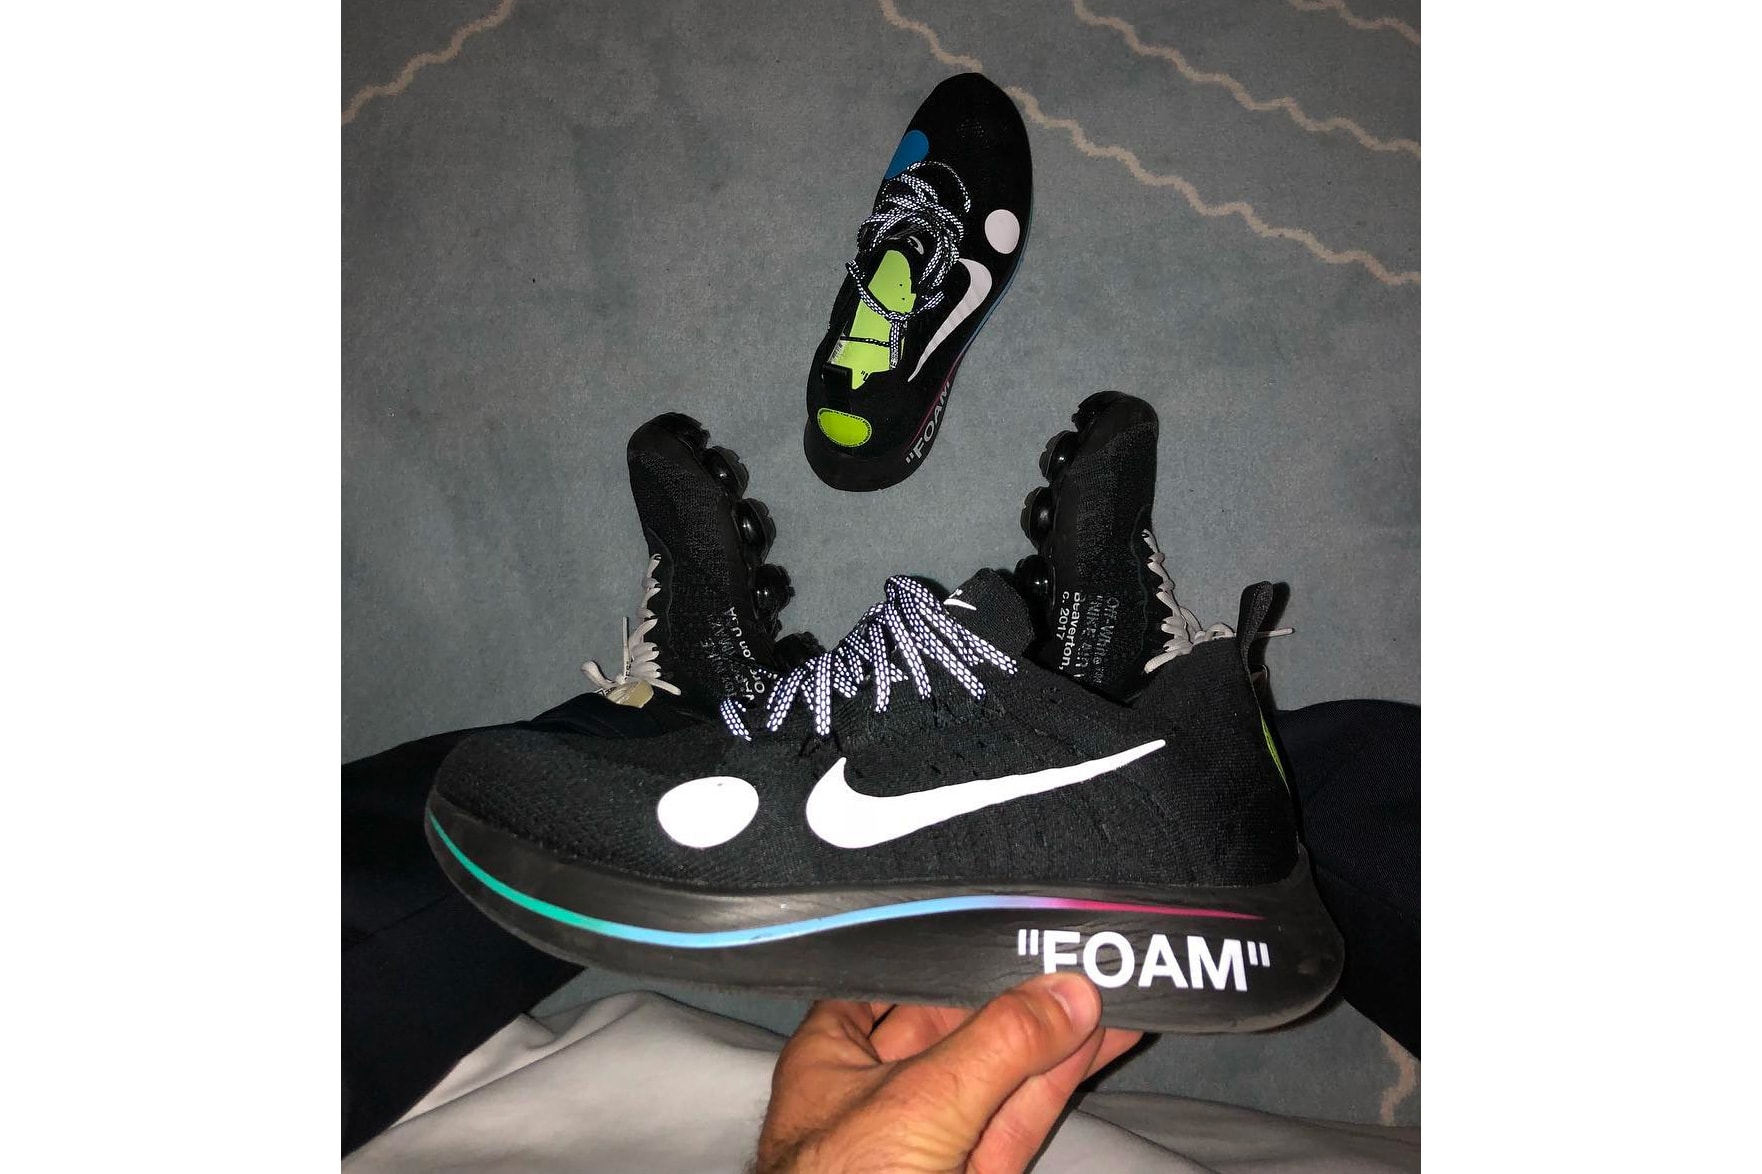 Virgil Abloh x Nike Zoom Fly Mercurial Flyknit black colorway off white release date preview sneaker